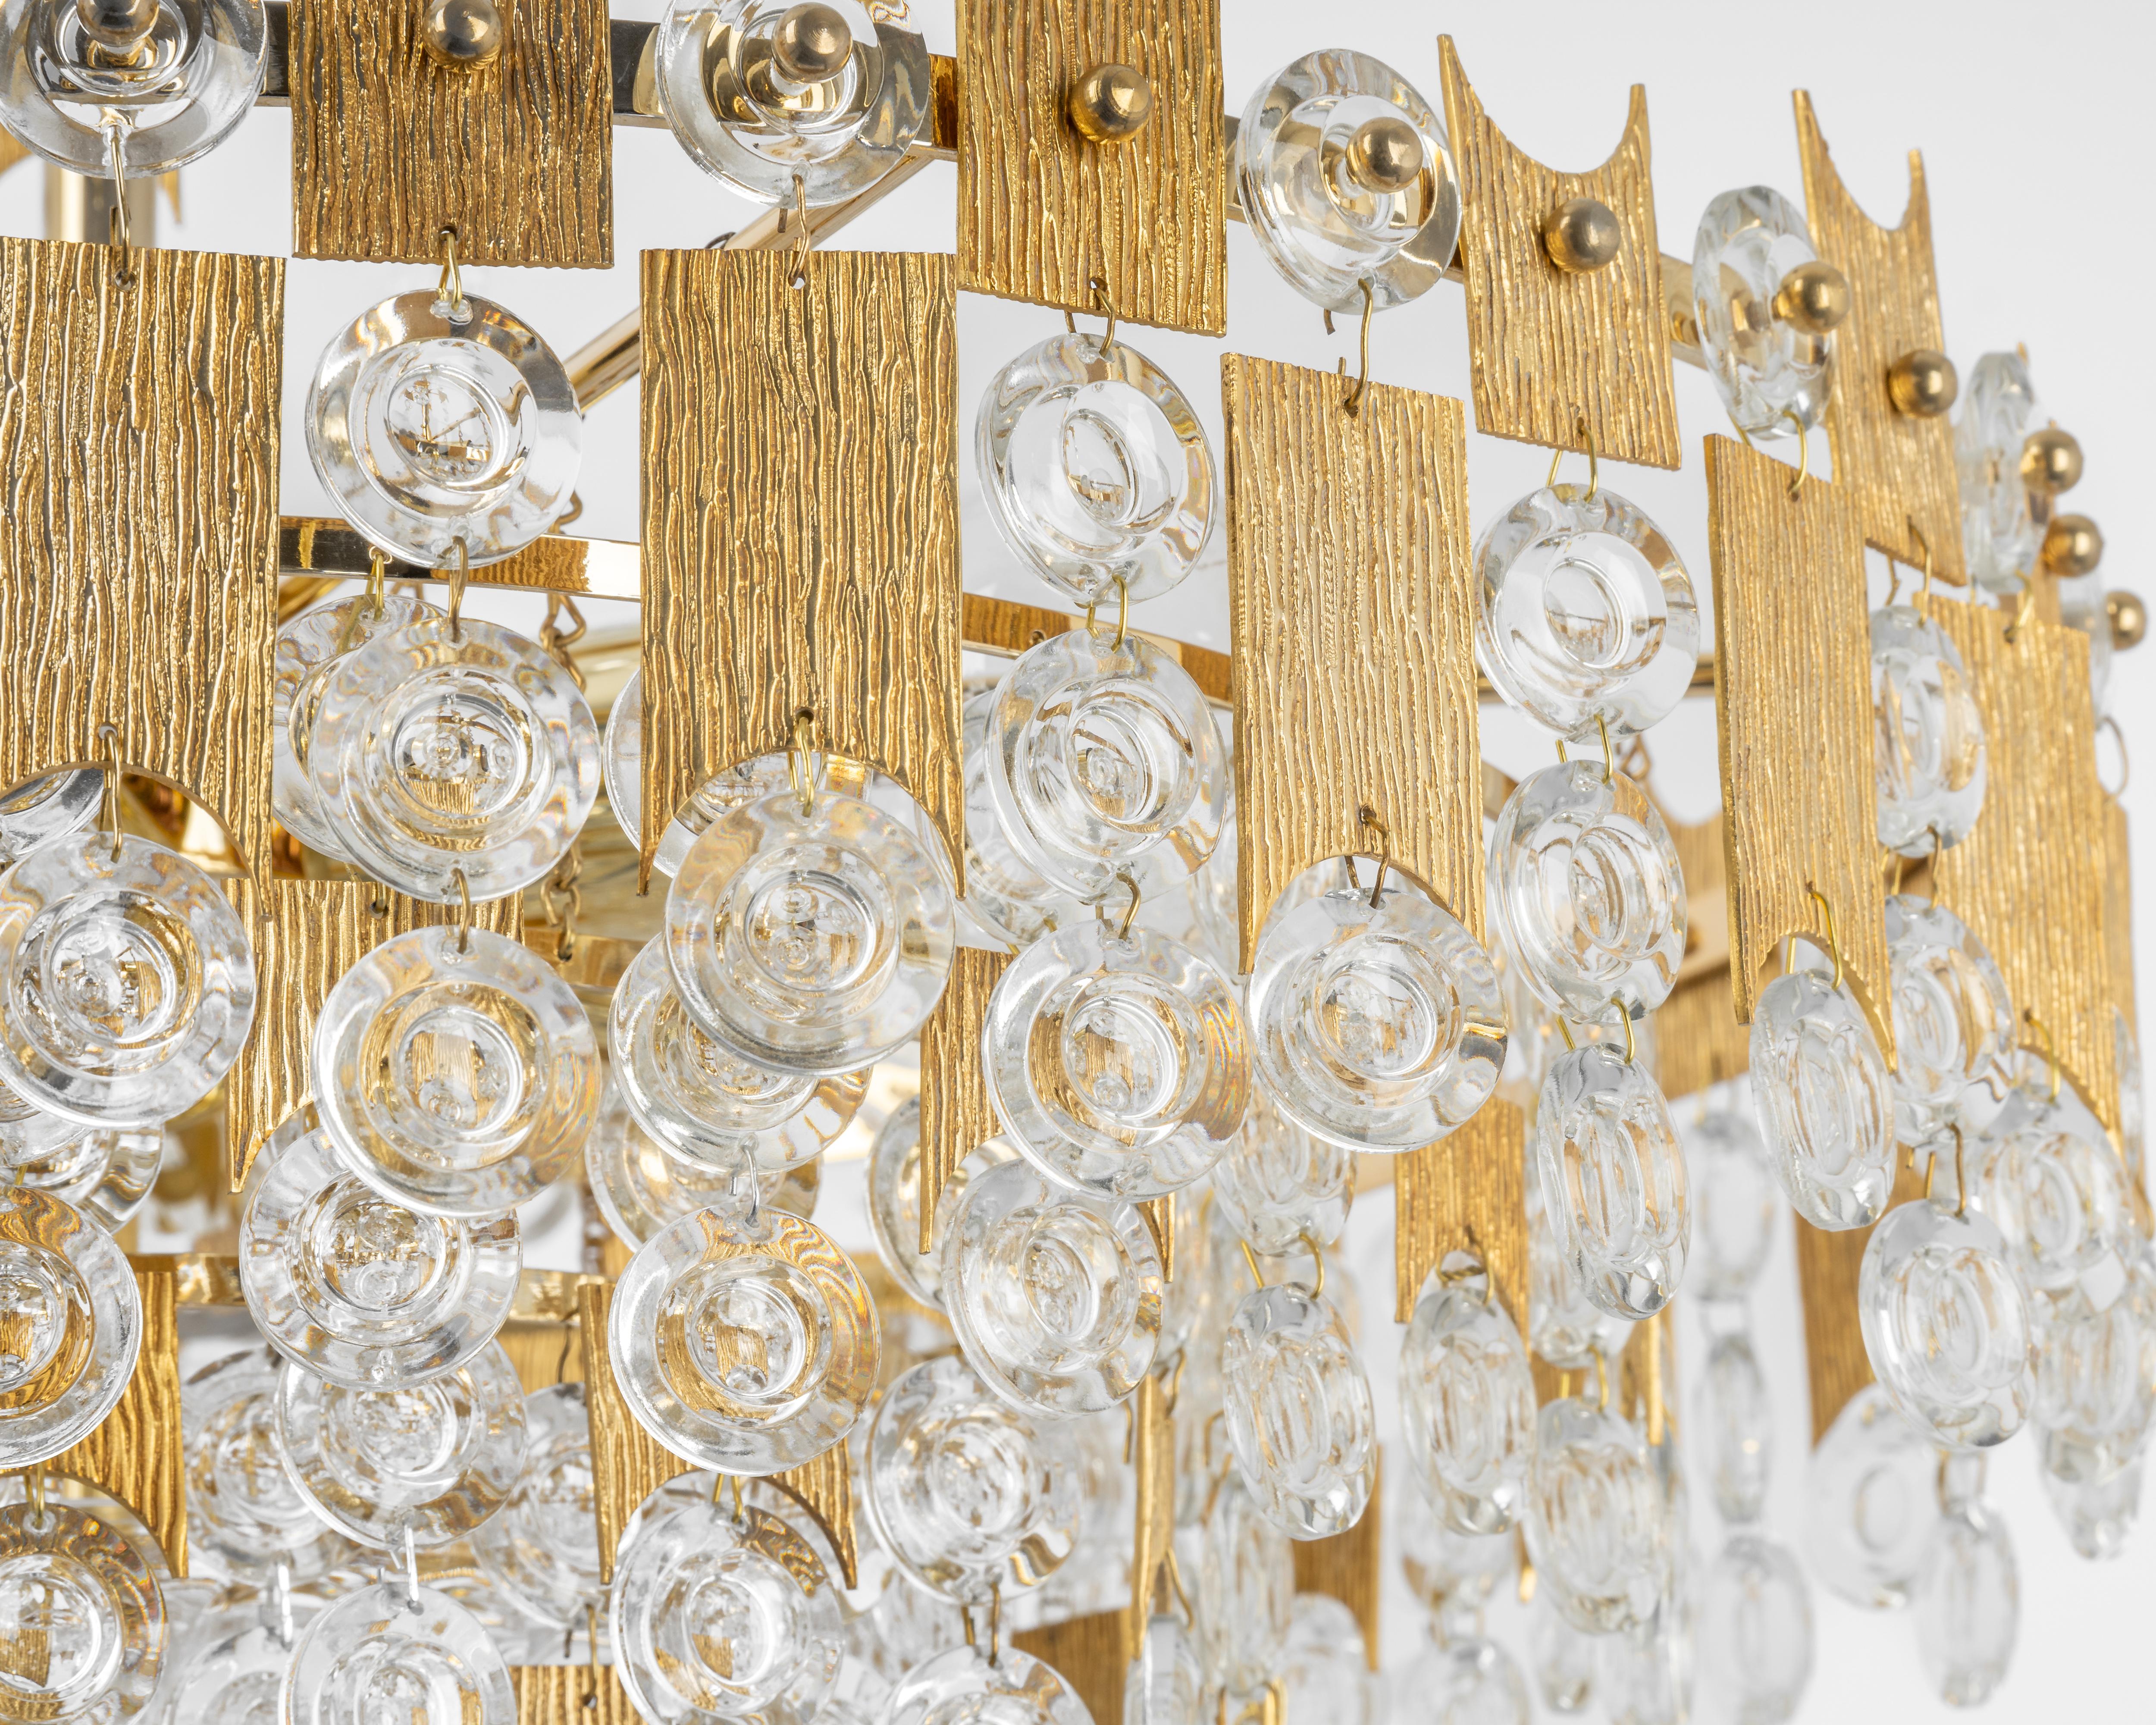 Mid-20th Century Impressive Large Gilt Brass and Crystal Glass Chandelier by Palwa Germany, 1960s For Sale